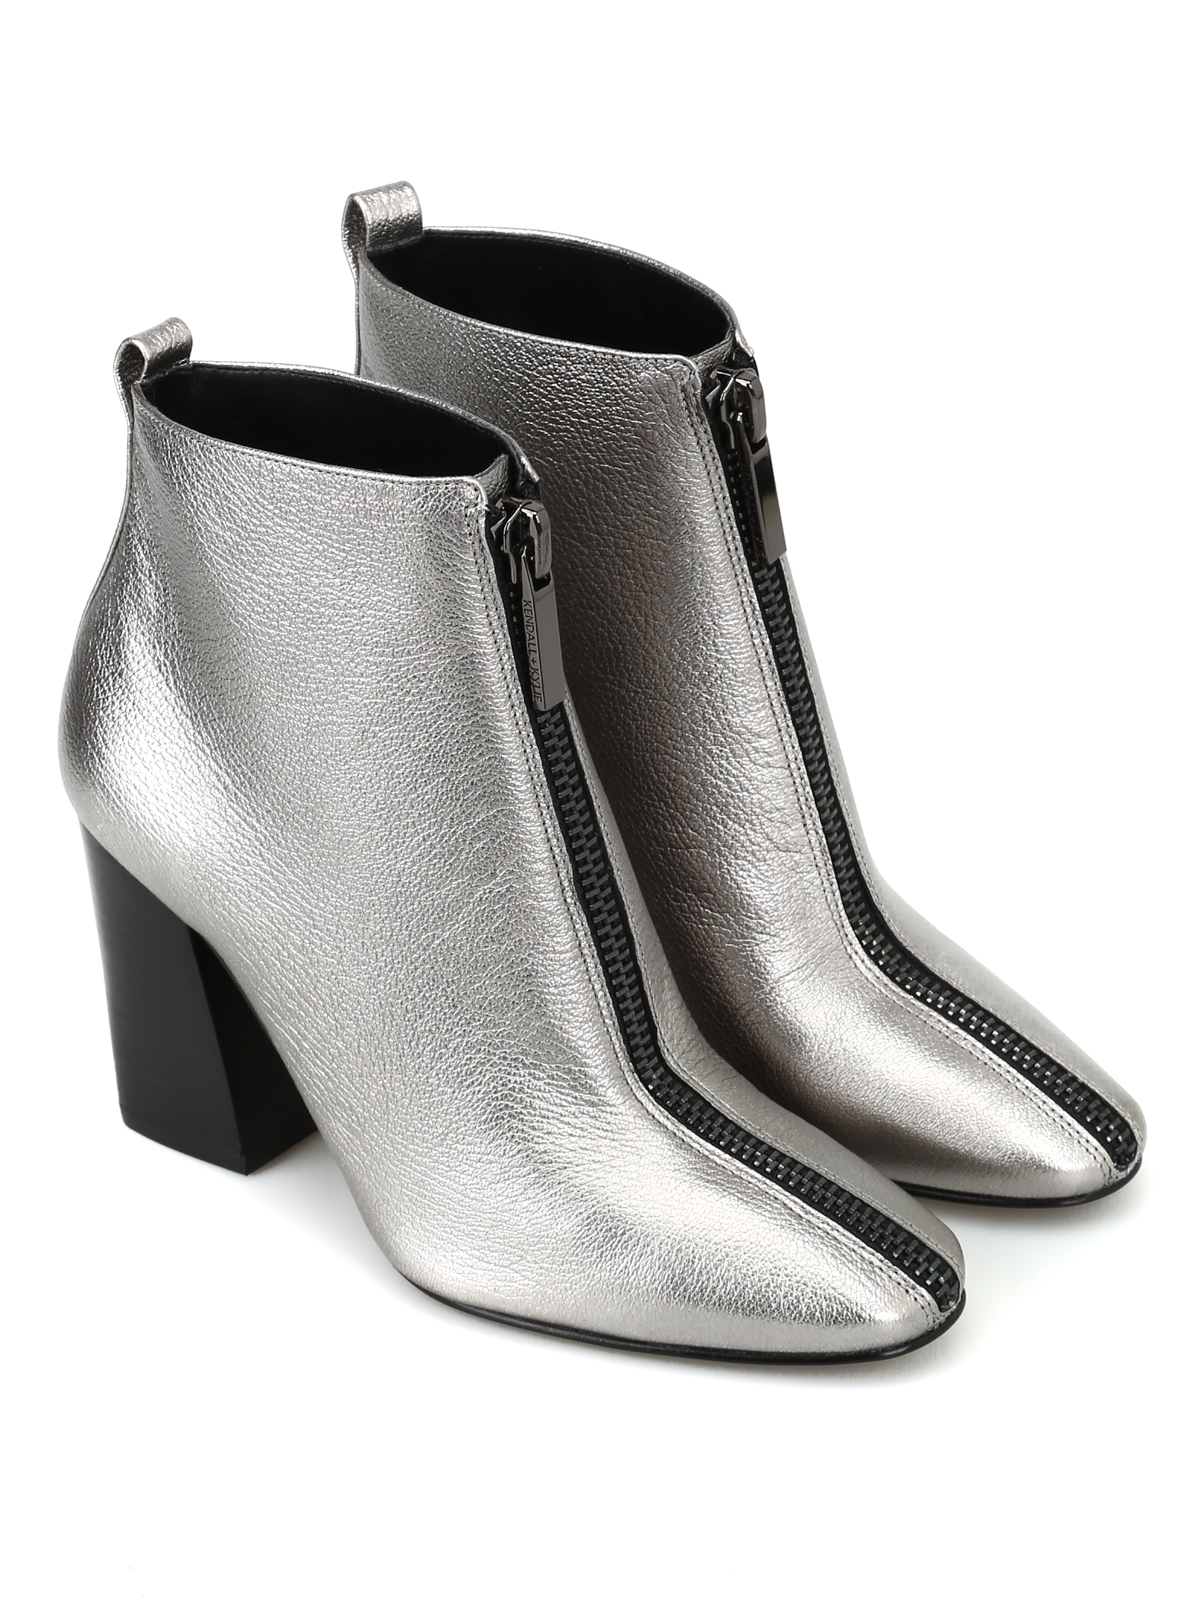 Kendall + Kylie - Reagan silver leather 